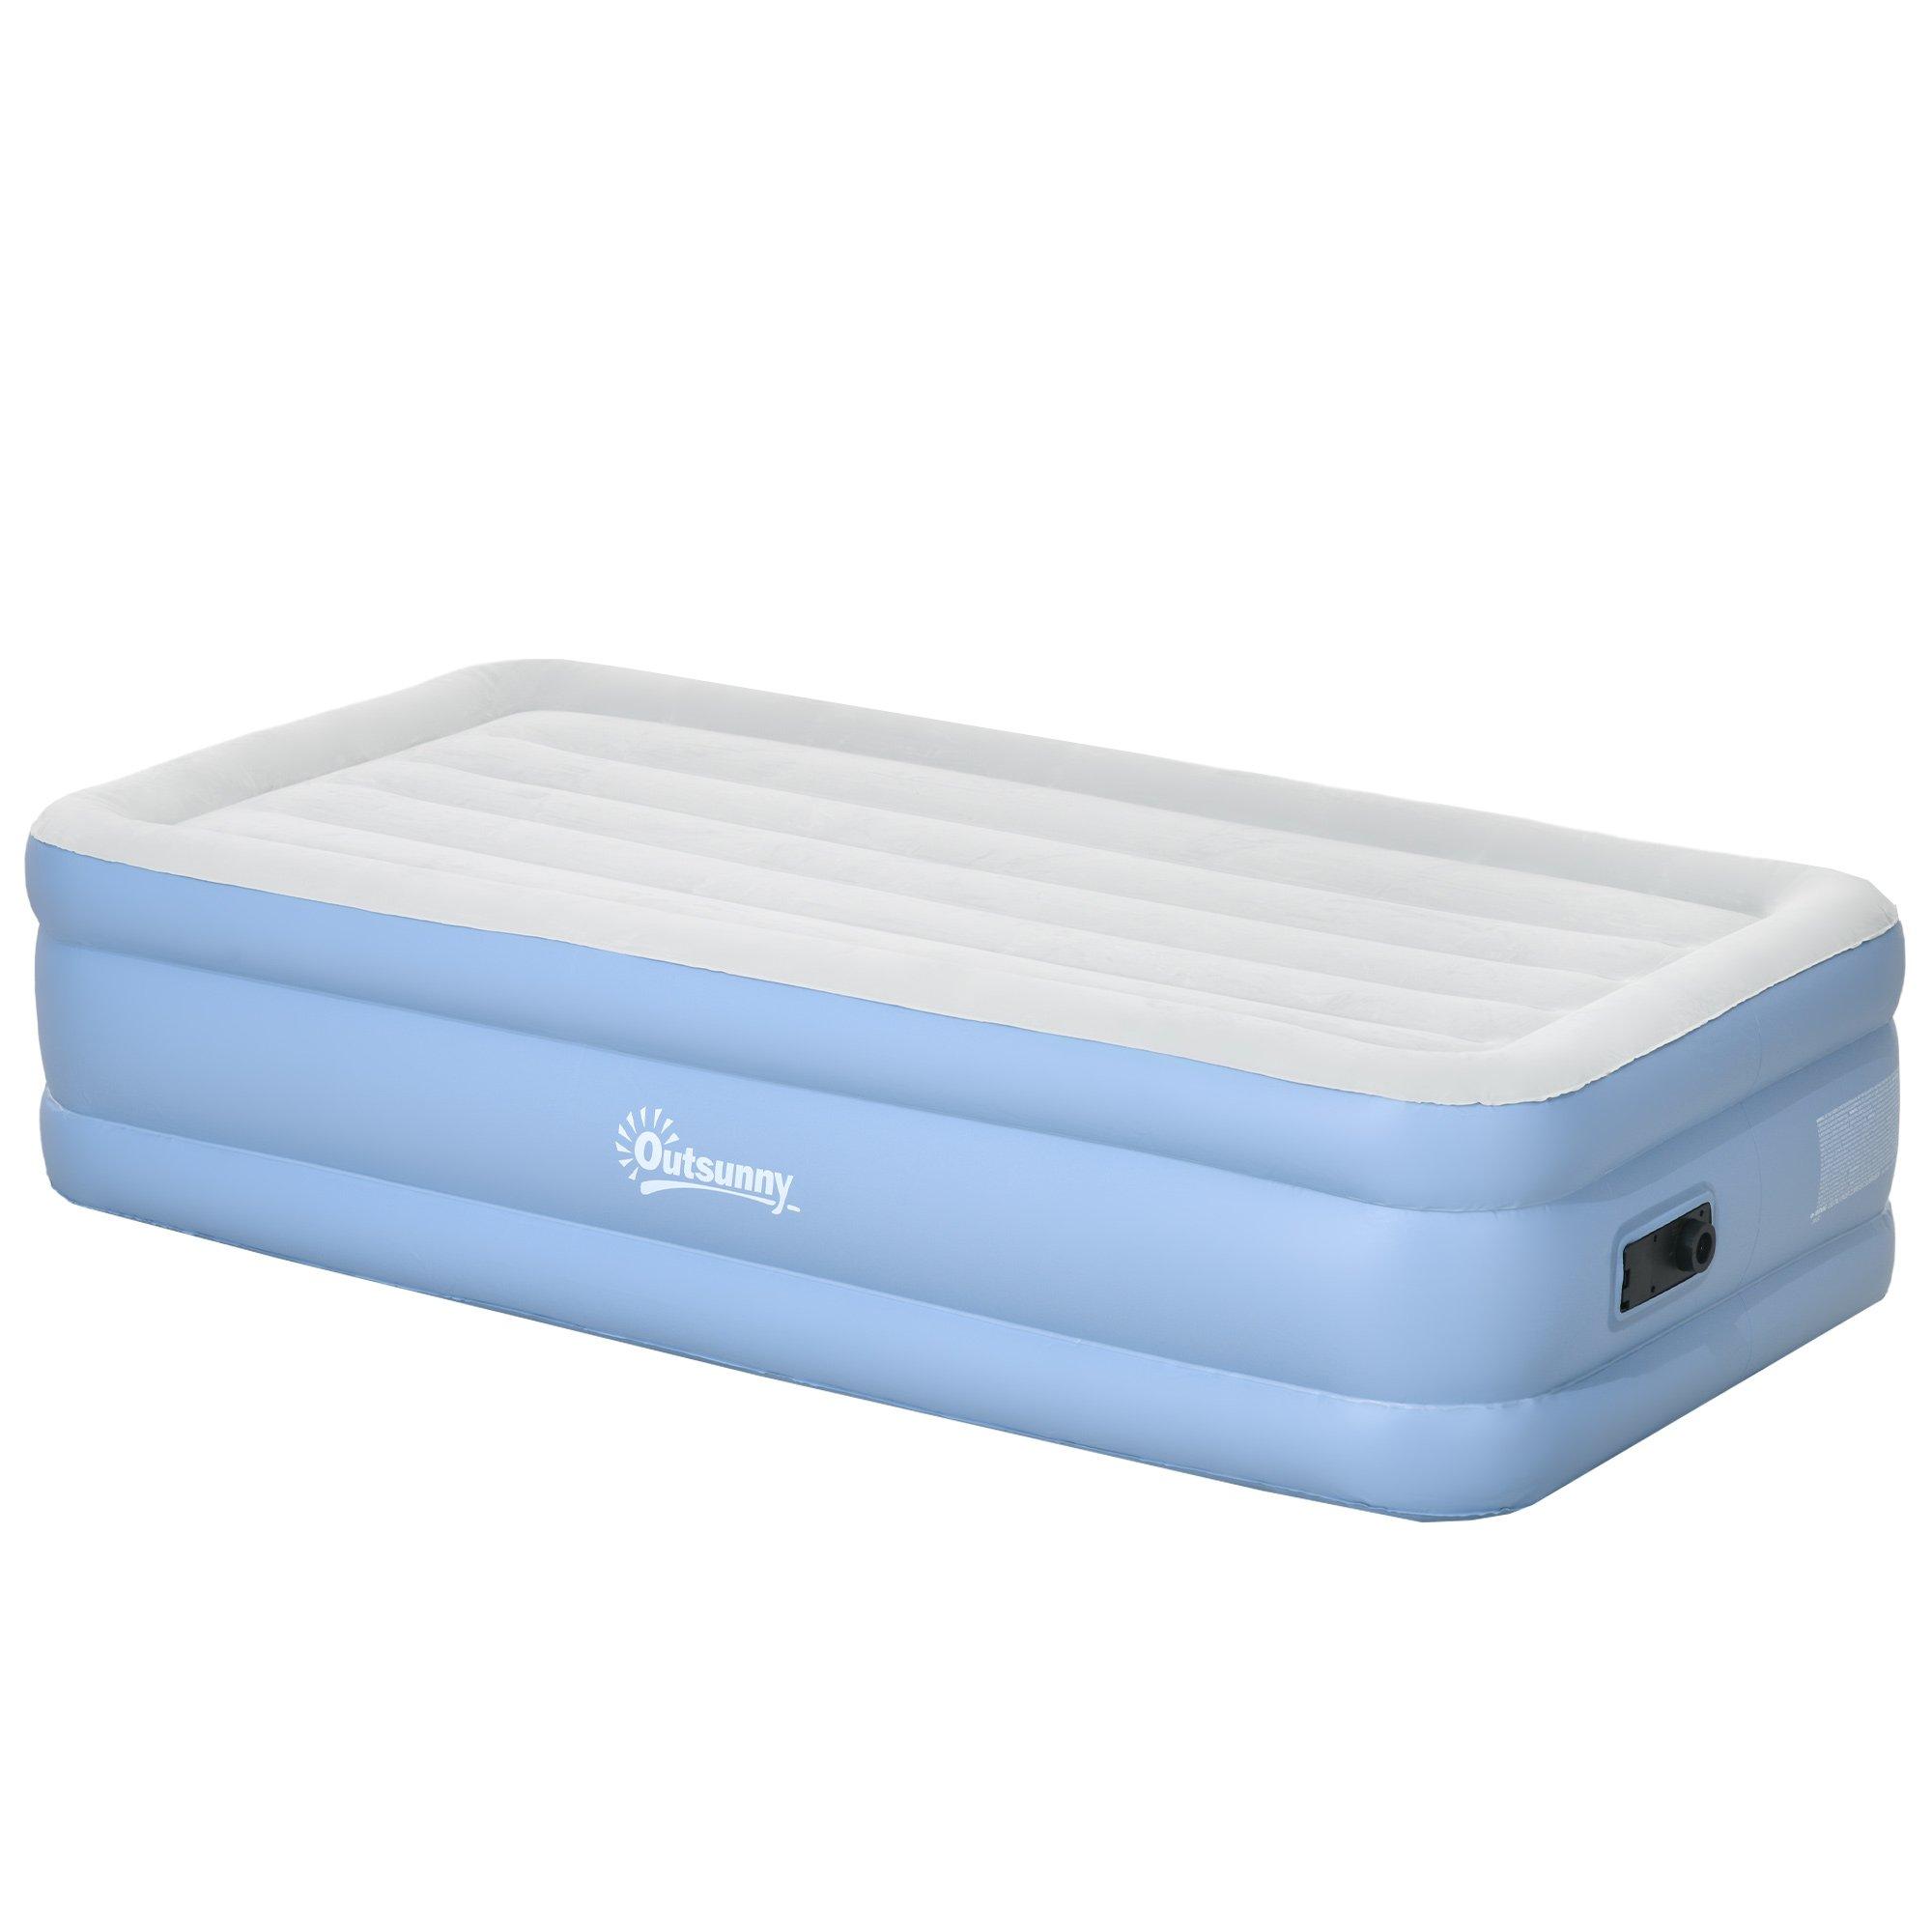 Single Air Bed with Built-in Pump, Inflatable Mattress, 191 x 99 x 46cm